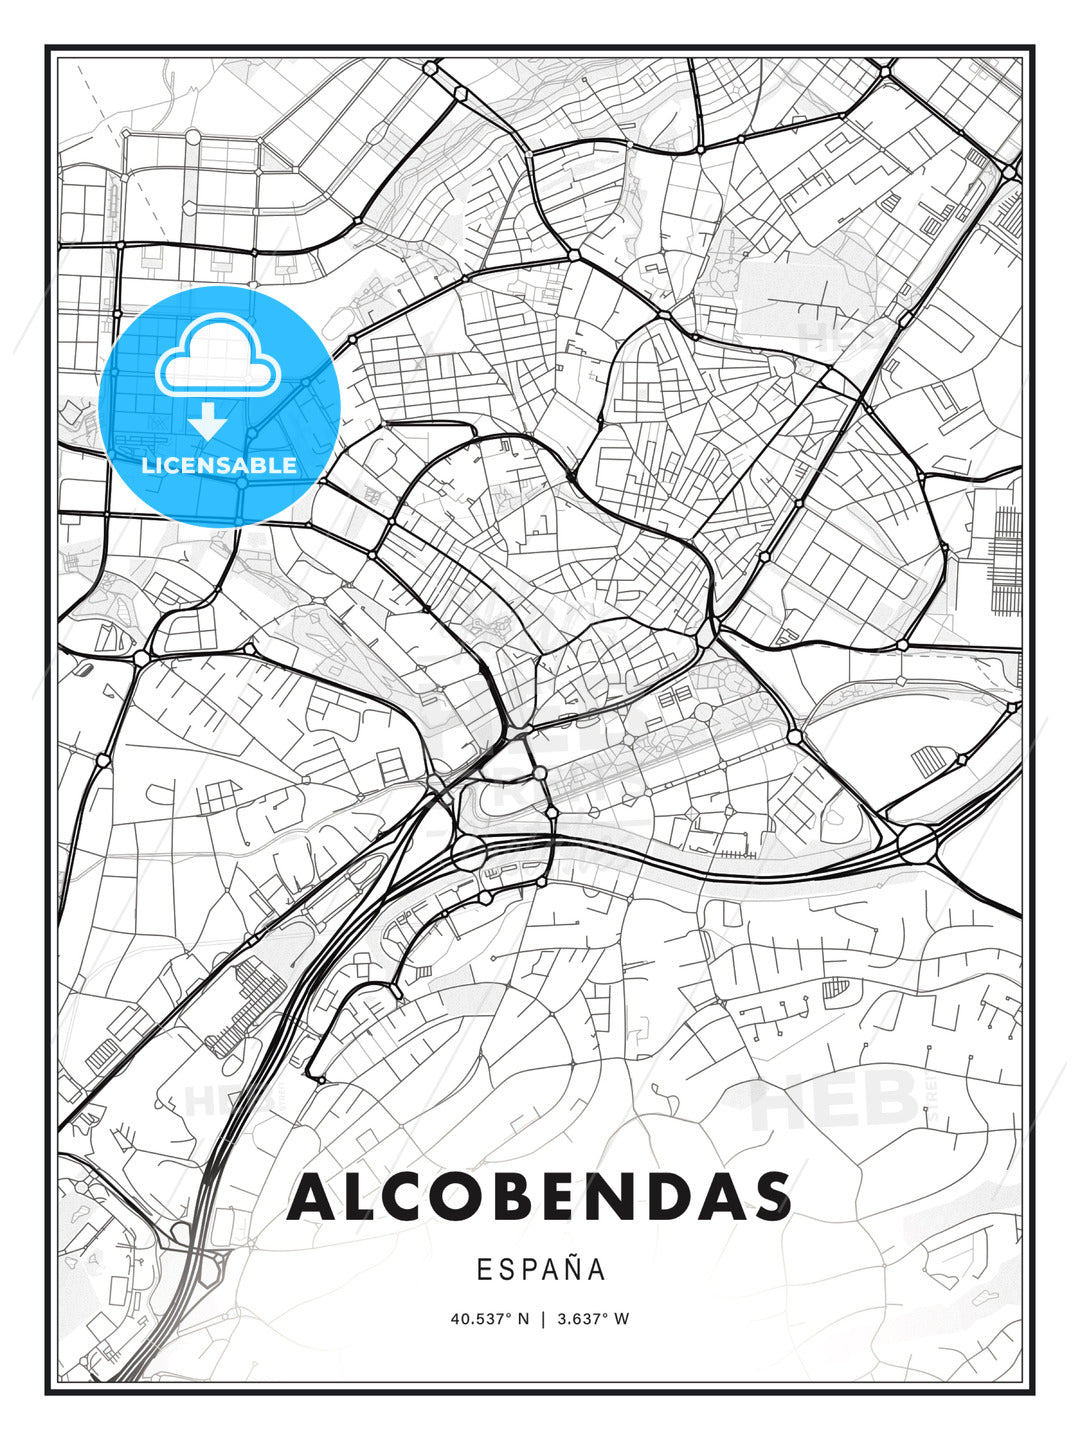 Alcobendas, Spain, Modern Print Template in Various Formats - HEBSTREITS Sketches